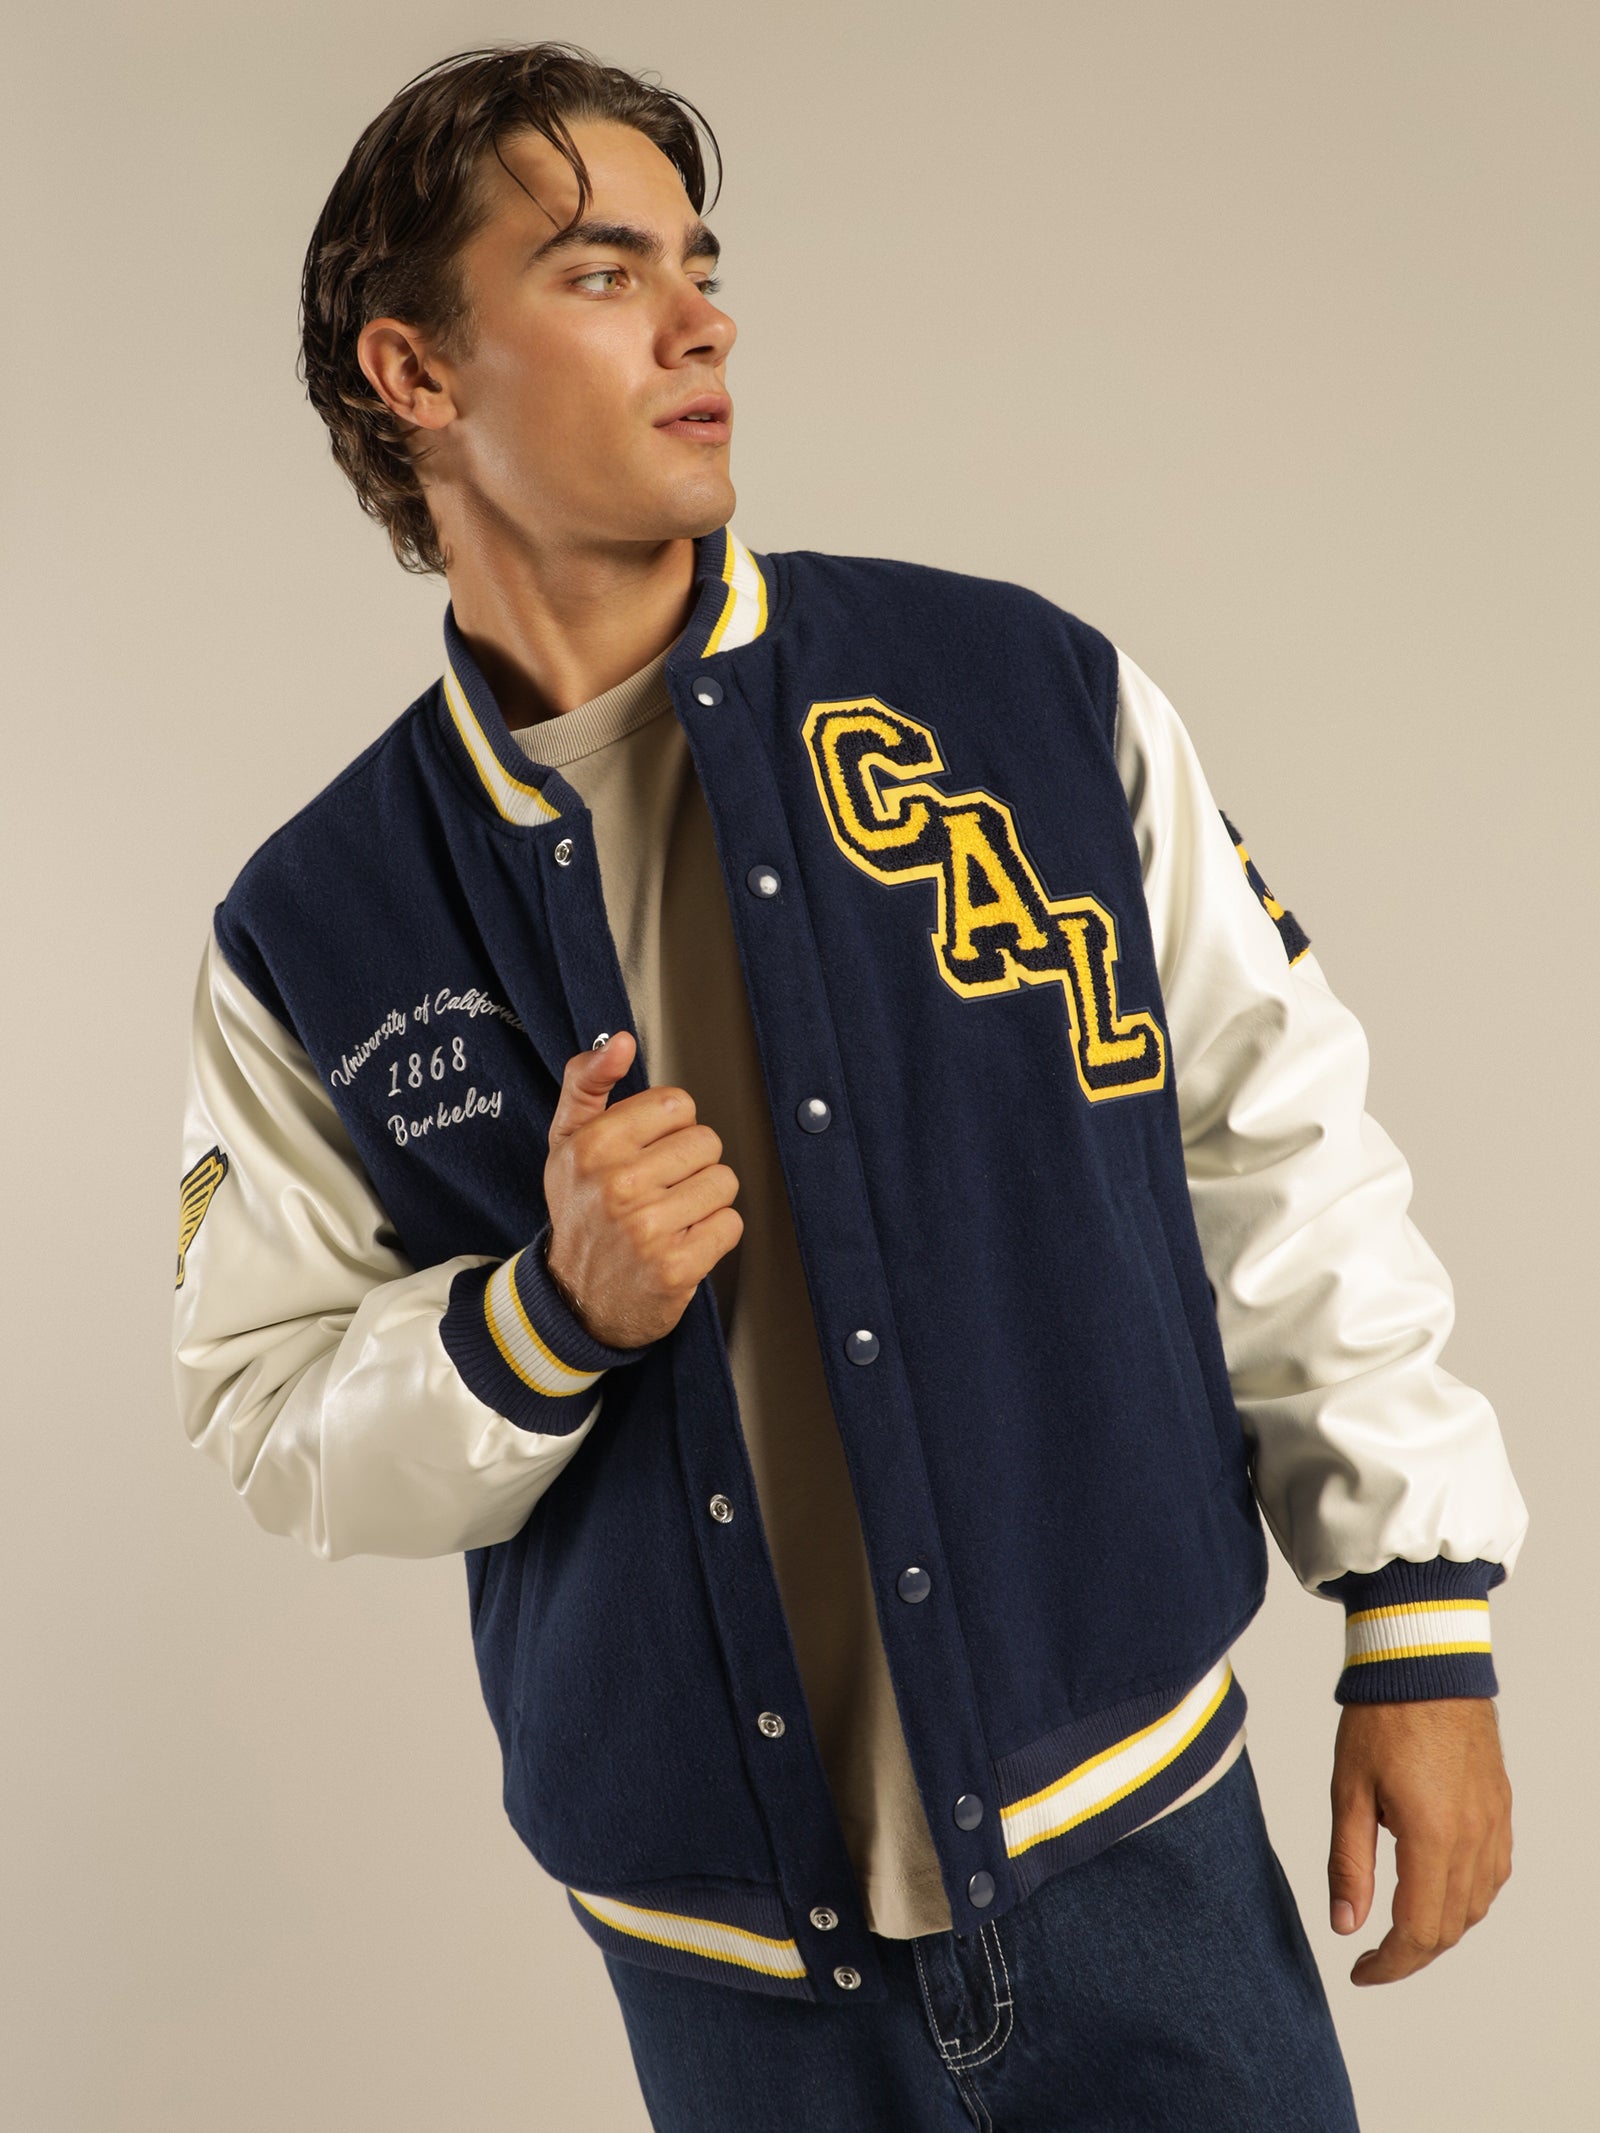 Two Tone Letterman Jacket in Navy - Glue Store